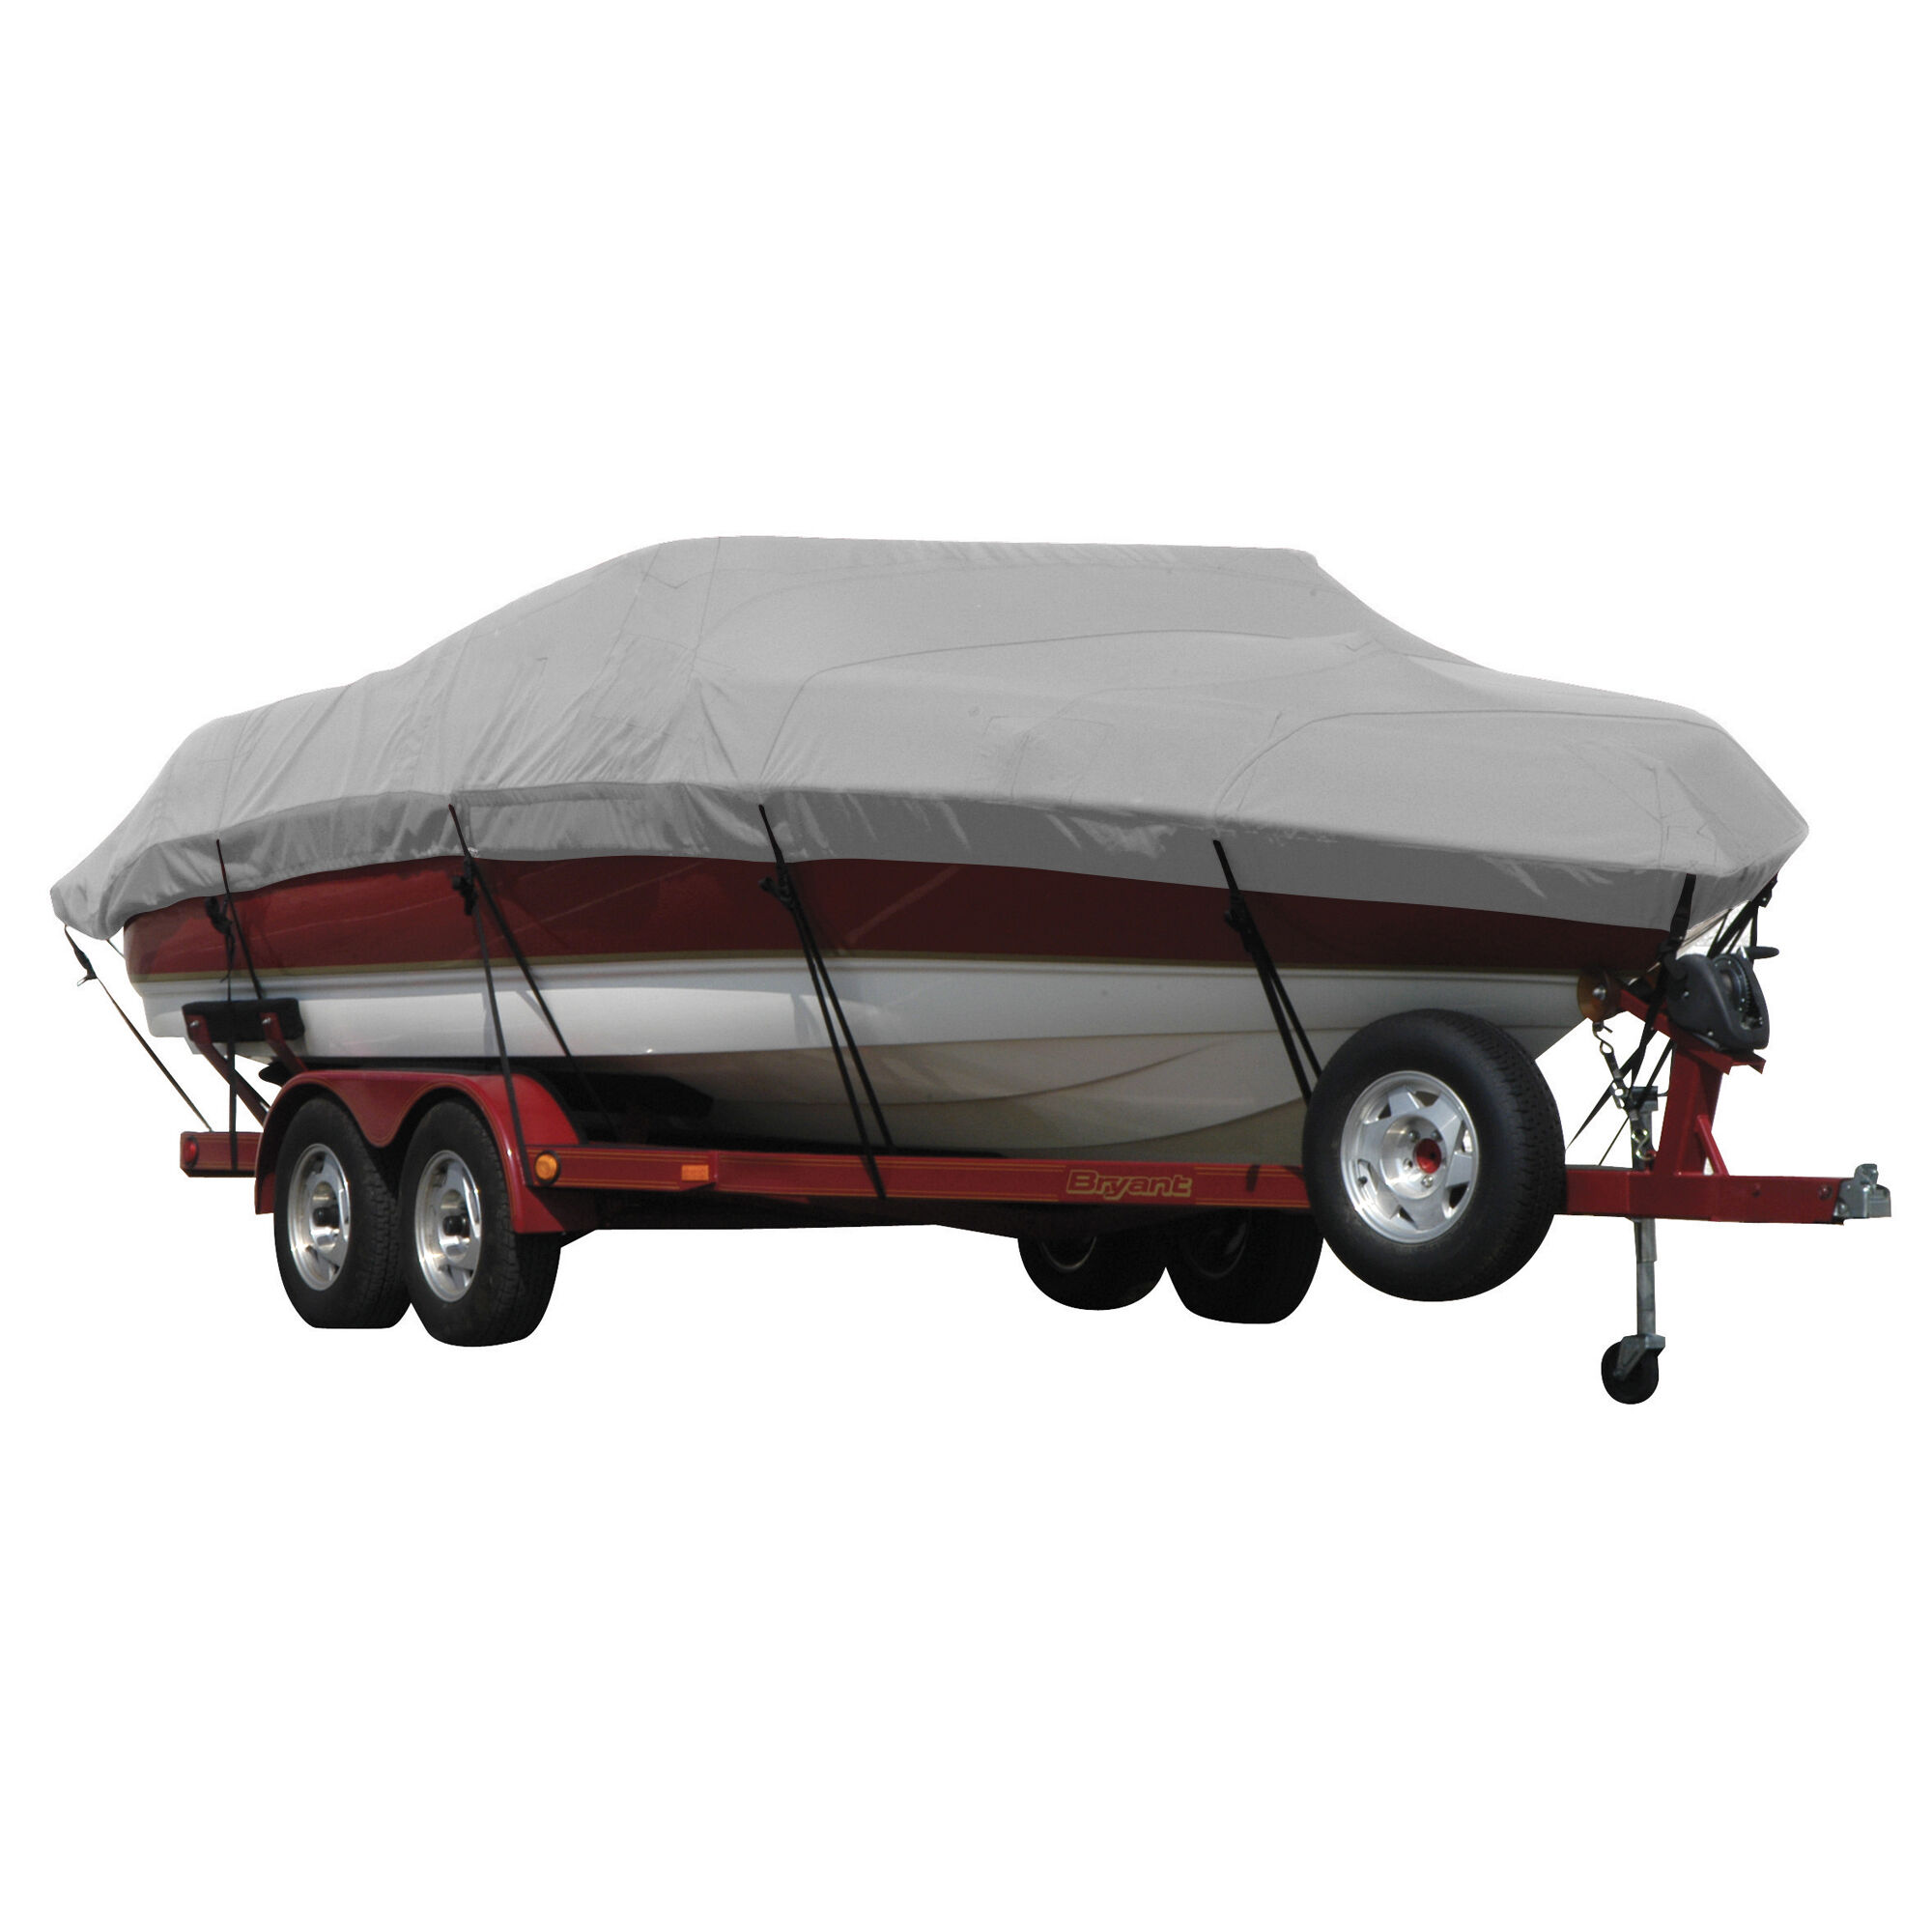 Covermate Exact Fit Sunbrella Boat Cover For Tracker Pro Guide V-175 Wt Bow Rider w/ Minnkota Port Trolling Motor I/O in Grey